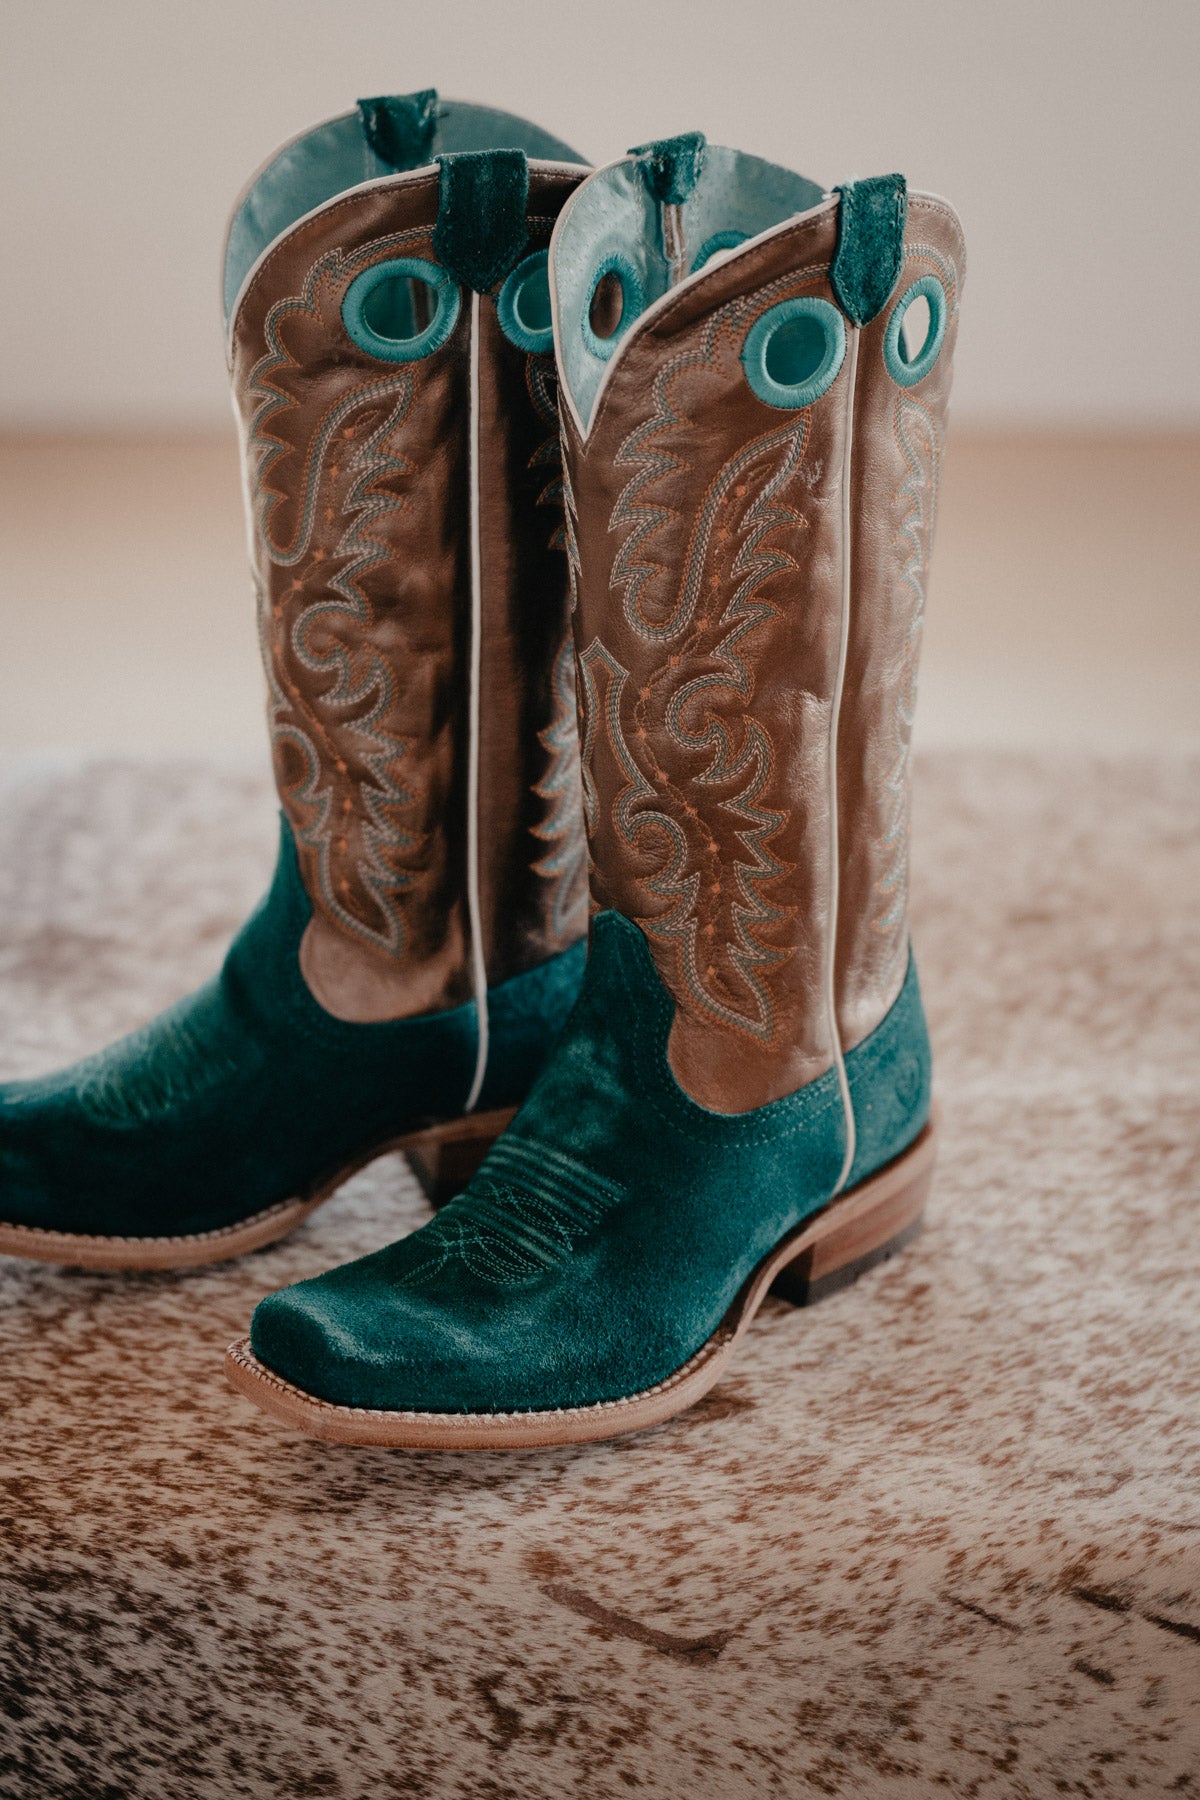 Futurity Boon Western Boot by Ariat (Turquoise Rough Out & Gold)